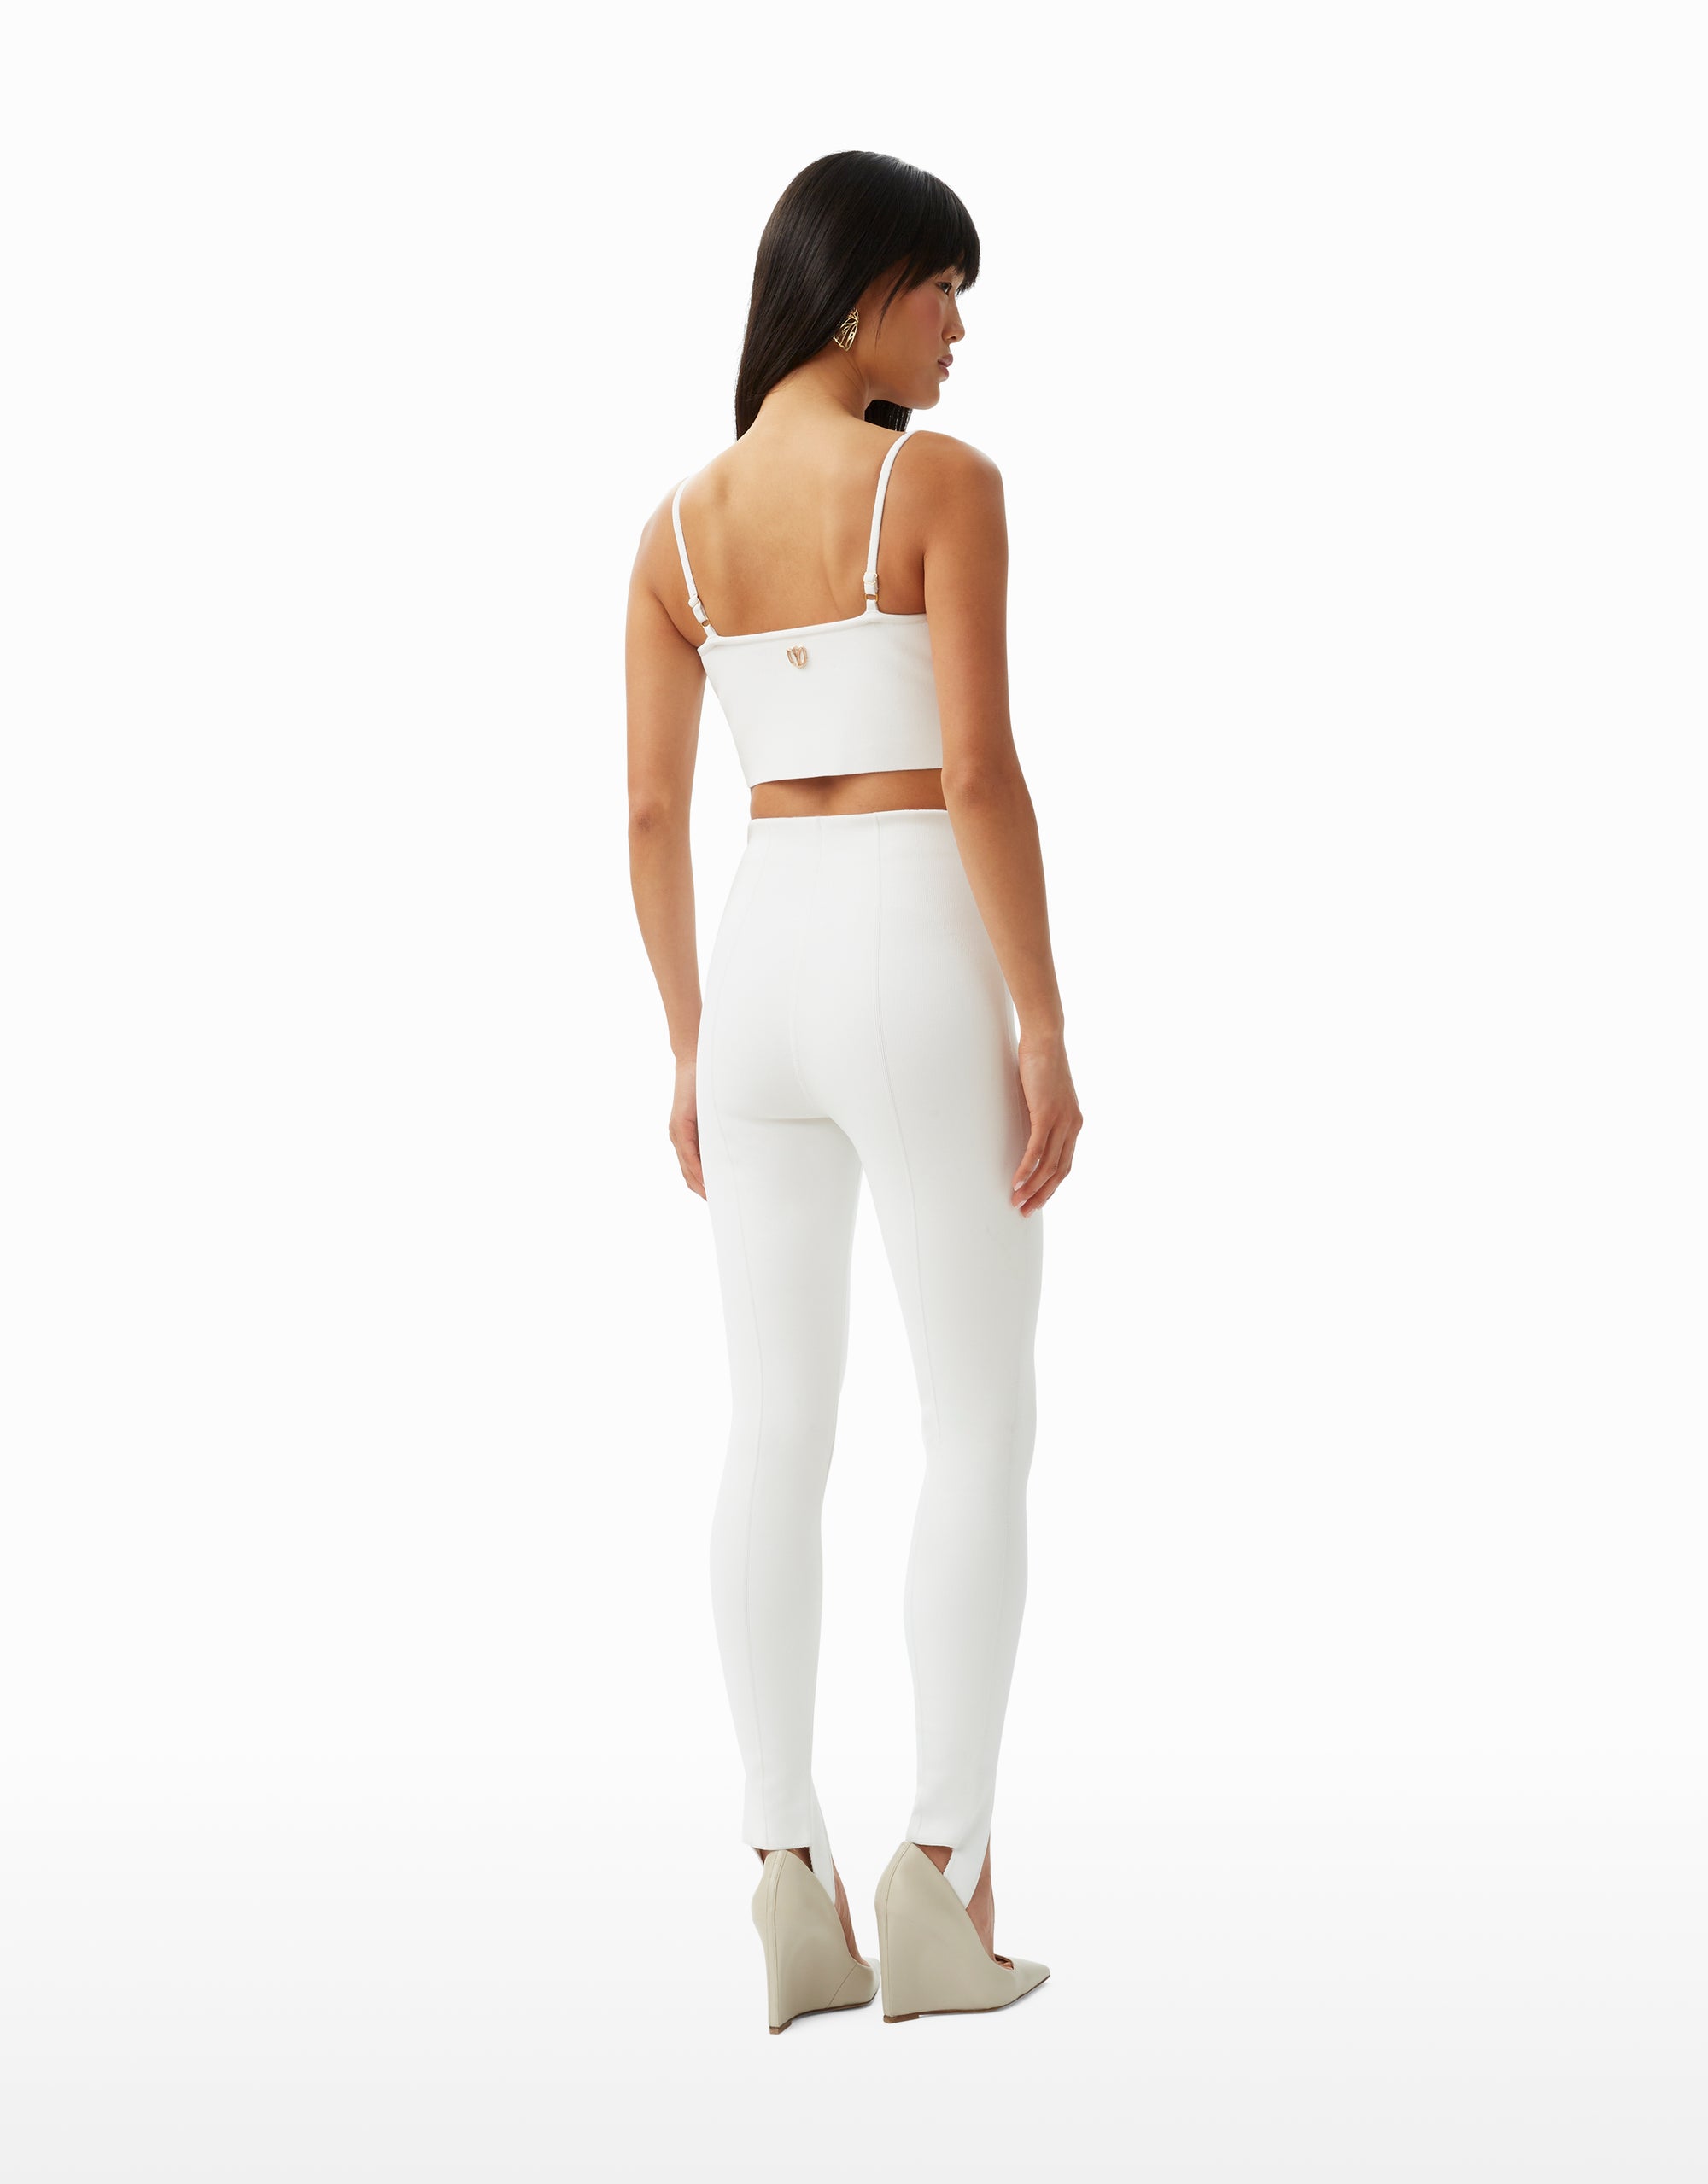 Ariana sculpt-knit keyhole bustier in white